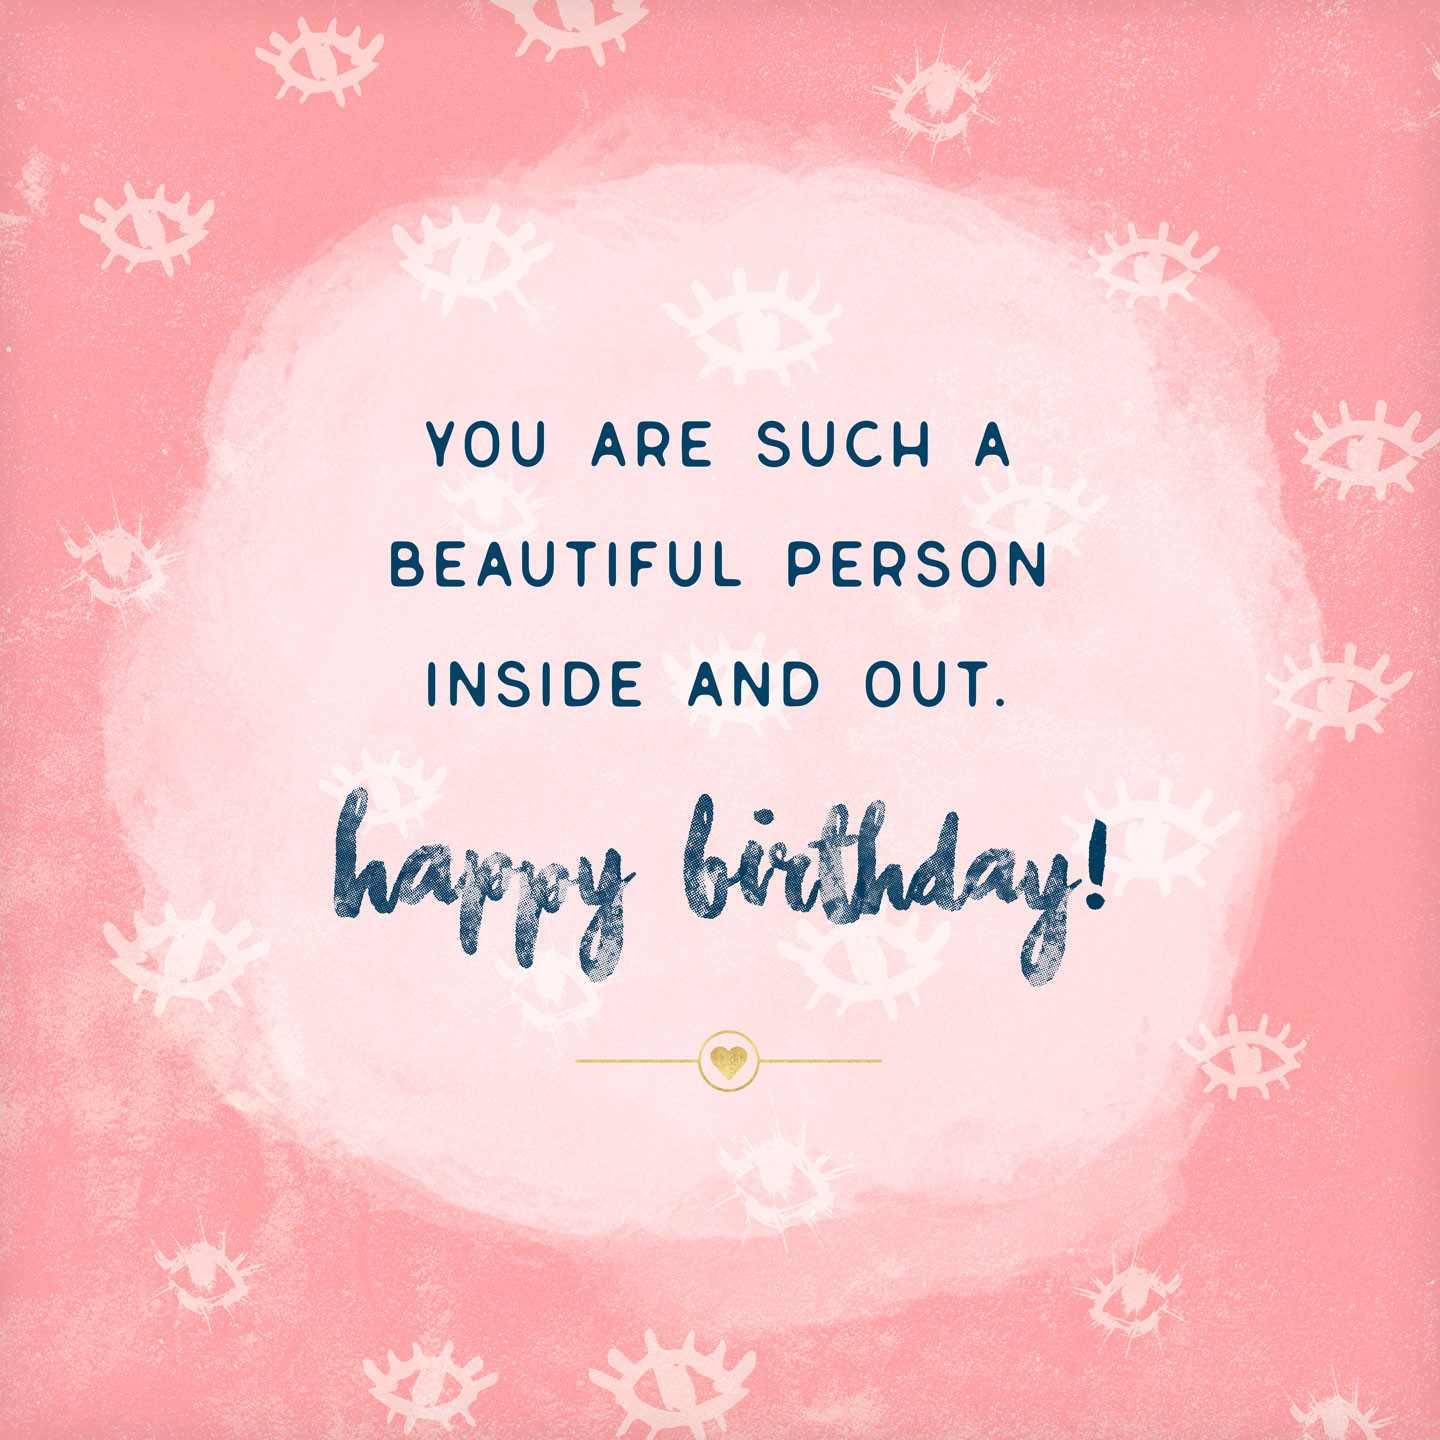 Birthday Card Messages For Friends
 What to Write in a Birthday Card 48 Birthday Messages and